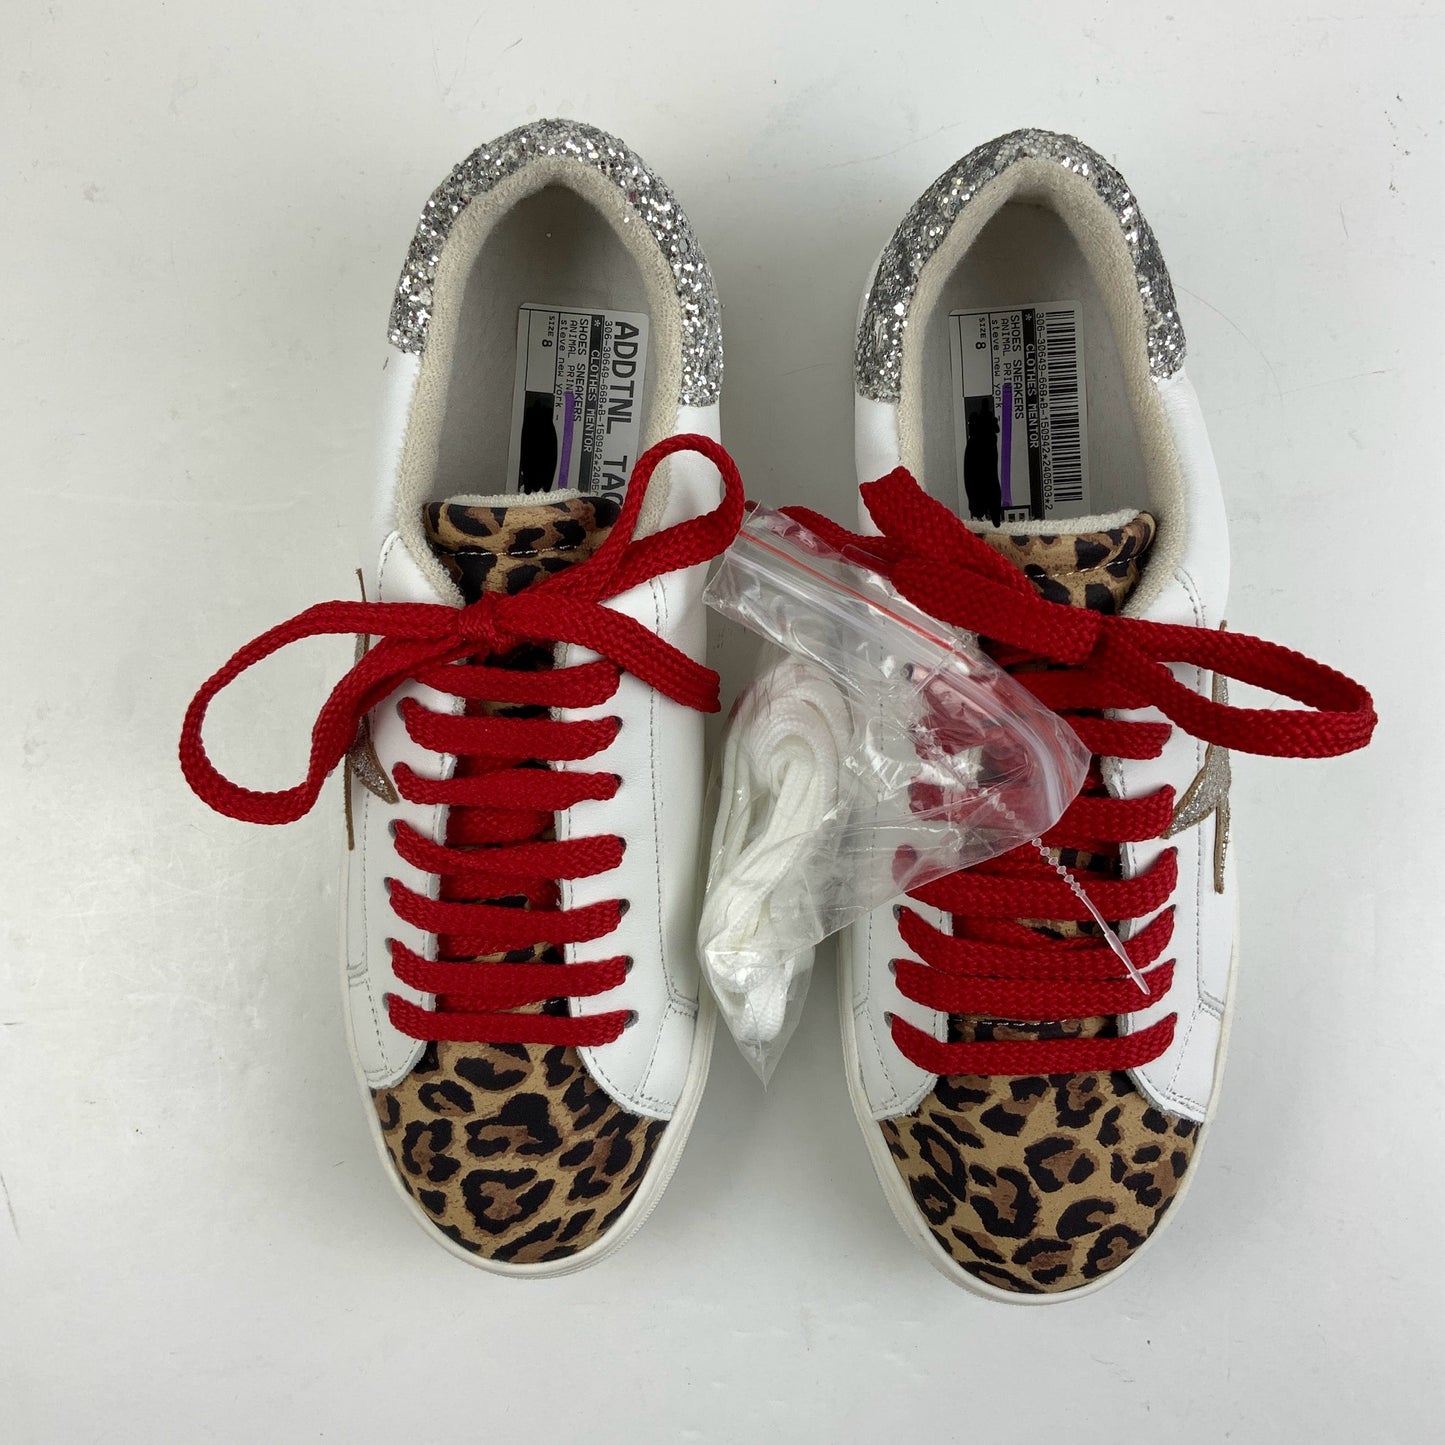 Animal Print Shoes Sneakers Clothes Mentor, Size 8